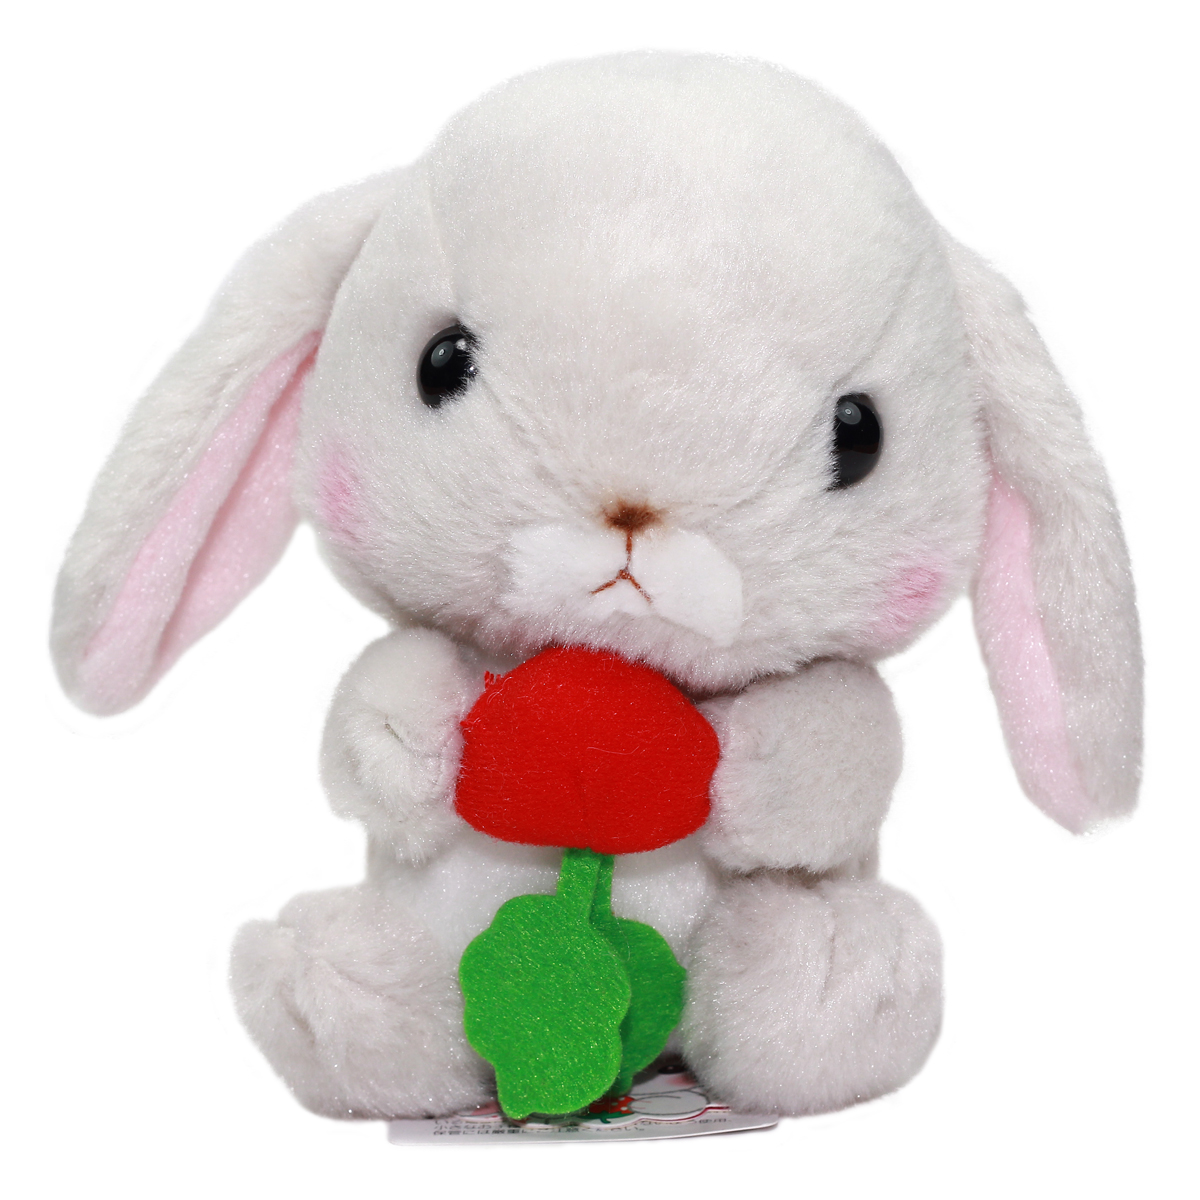 Amuse Bunny Plush Doll Sweet Garden Collection Cute Stuffed Animal Toy Grey 6 Inches